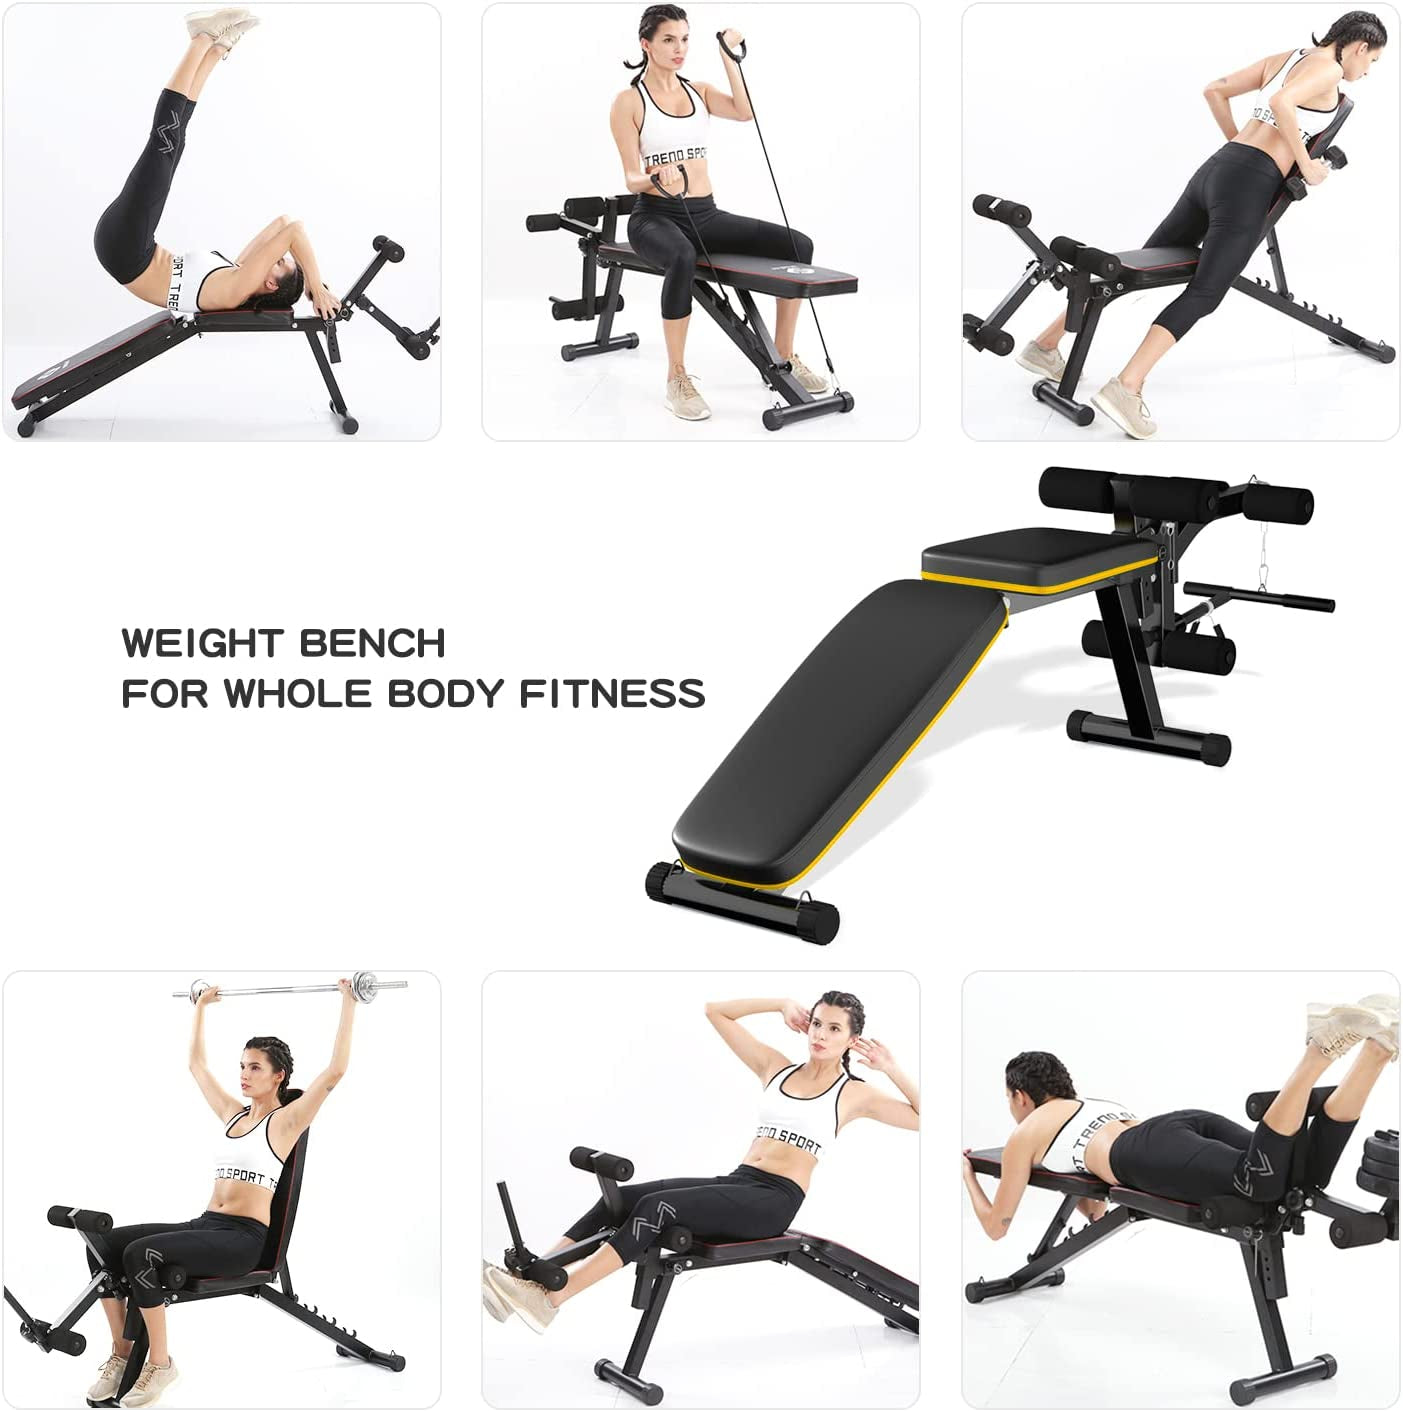 ZENOVA Adjustable Weight Bench Workout Bench with Leg Extension, Incline Decline Exercise Bench Strength Training Equipment Home Gym